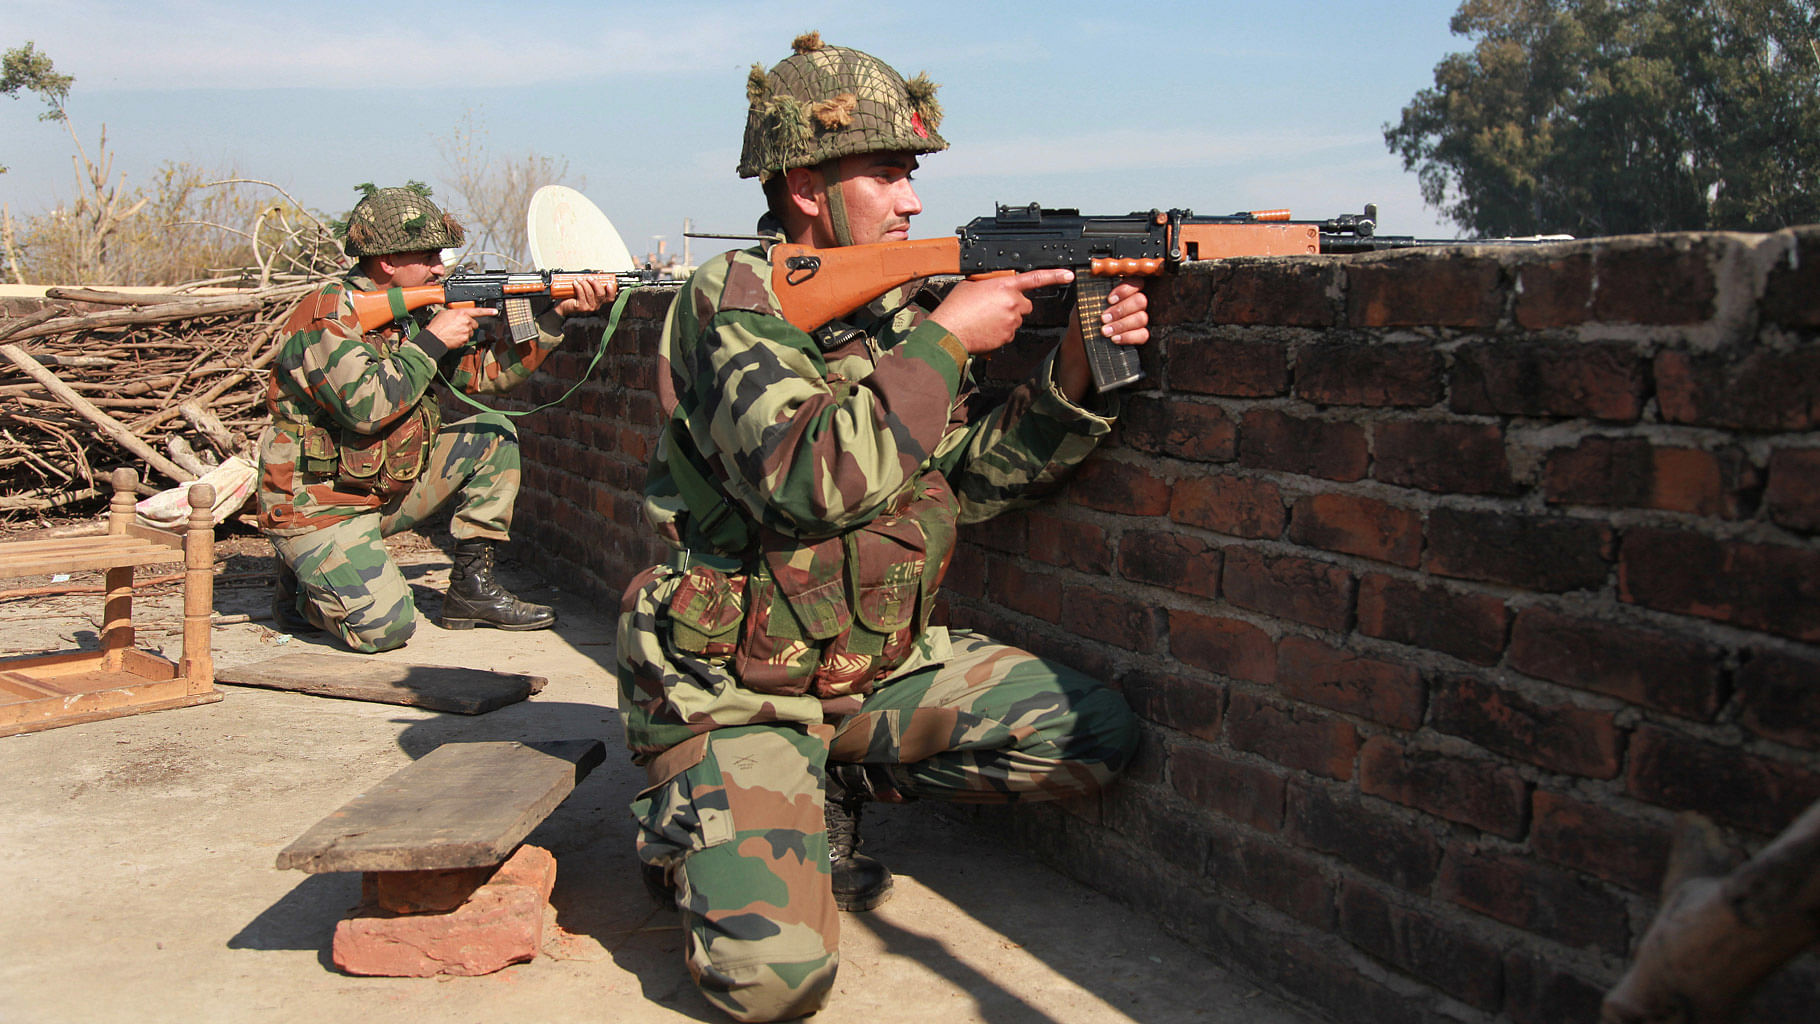 Representational image of Indian Army personnel. (Photo: AP)